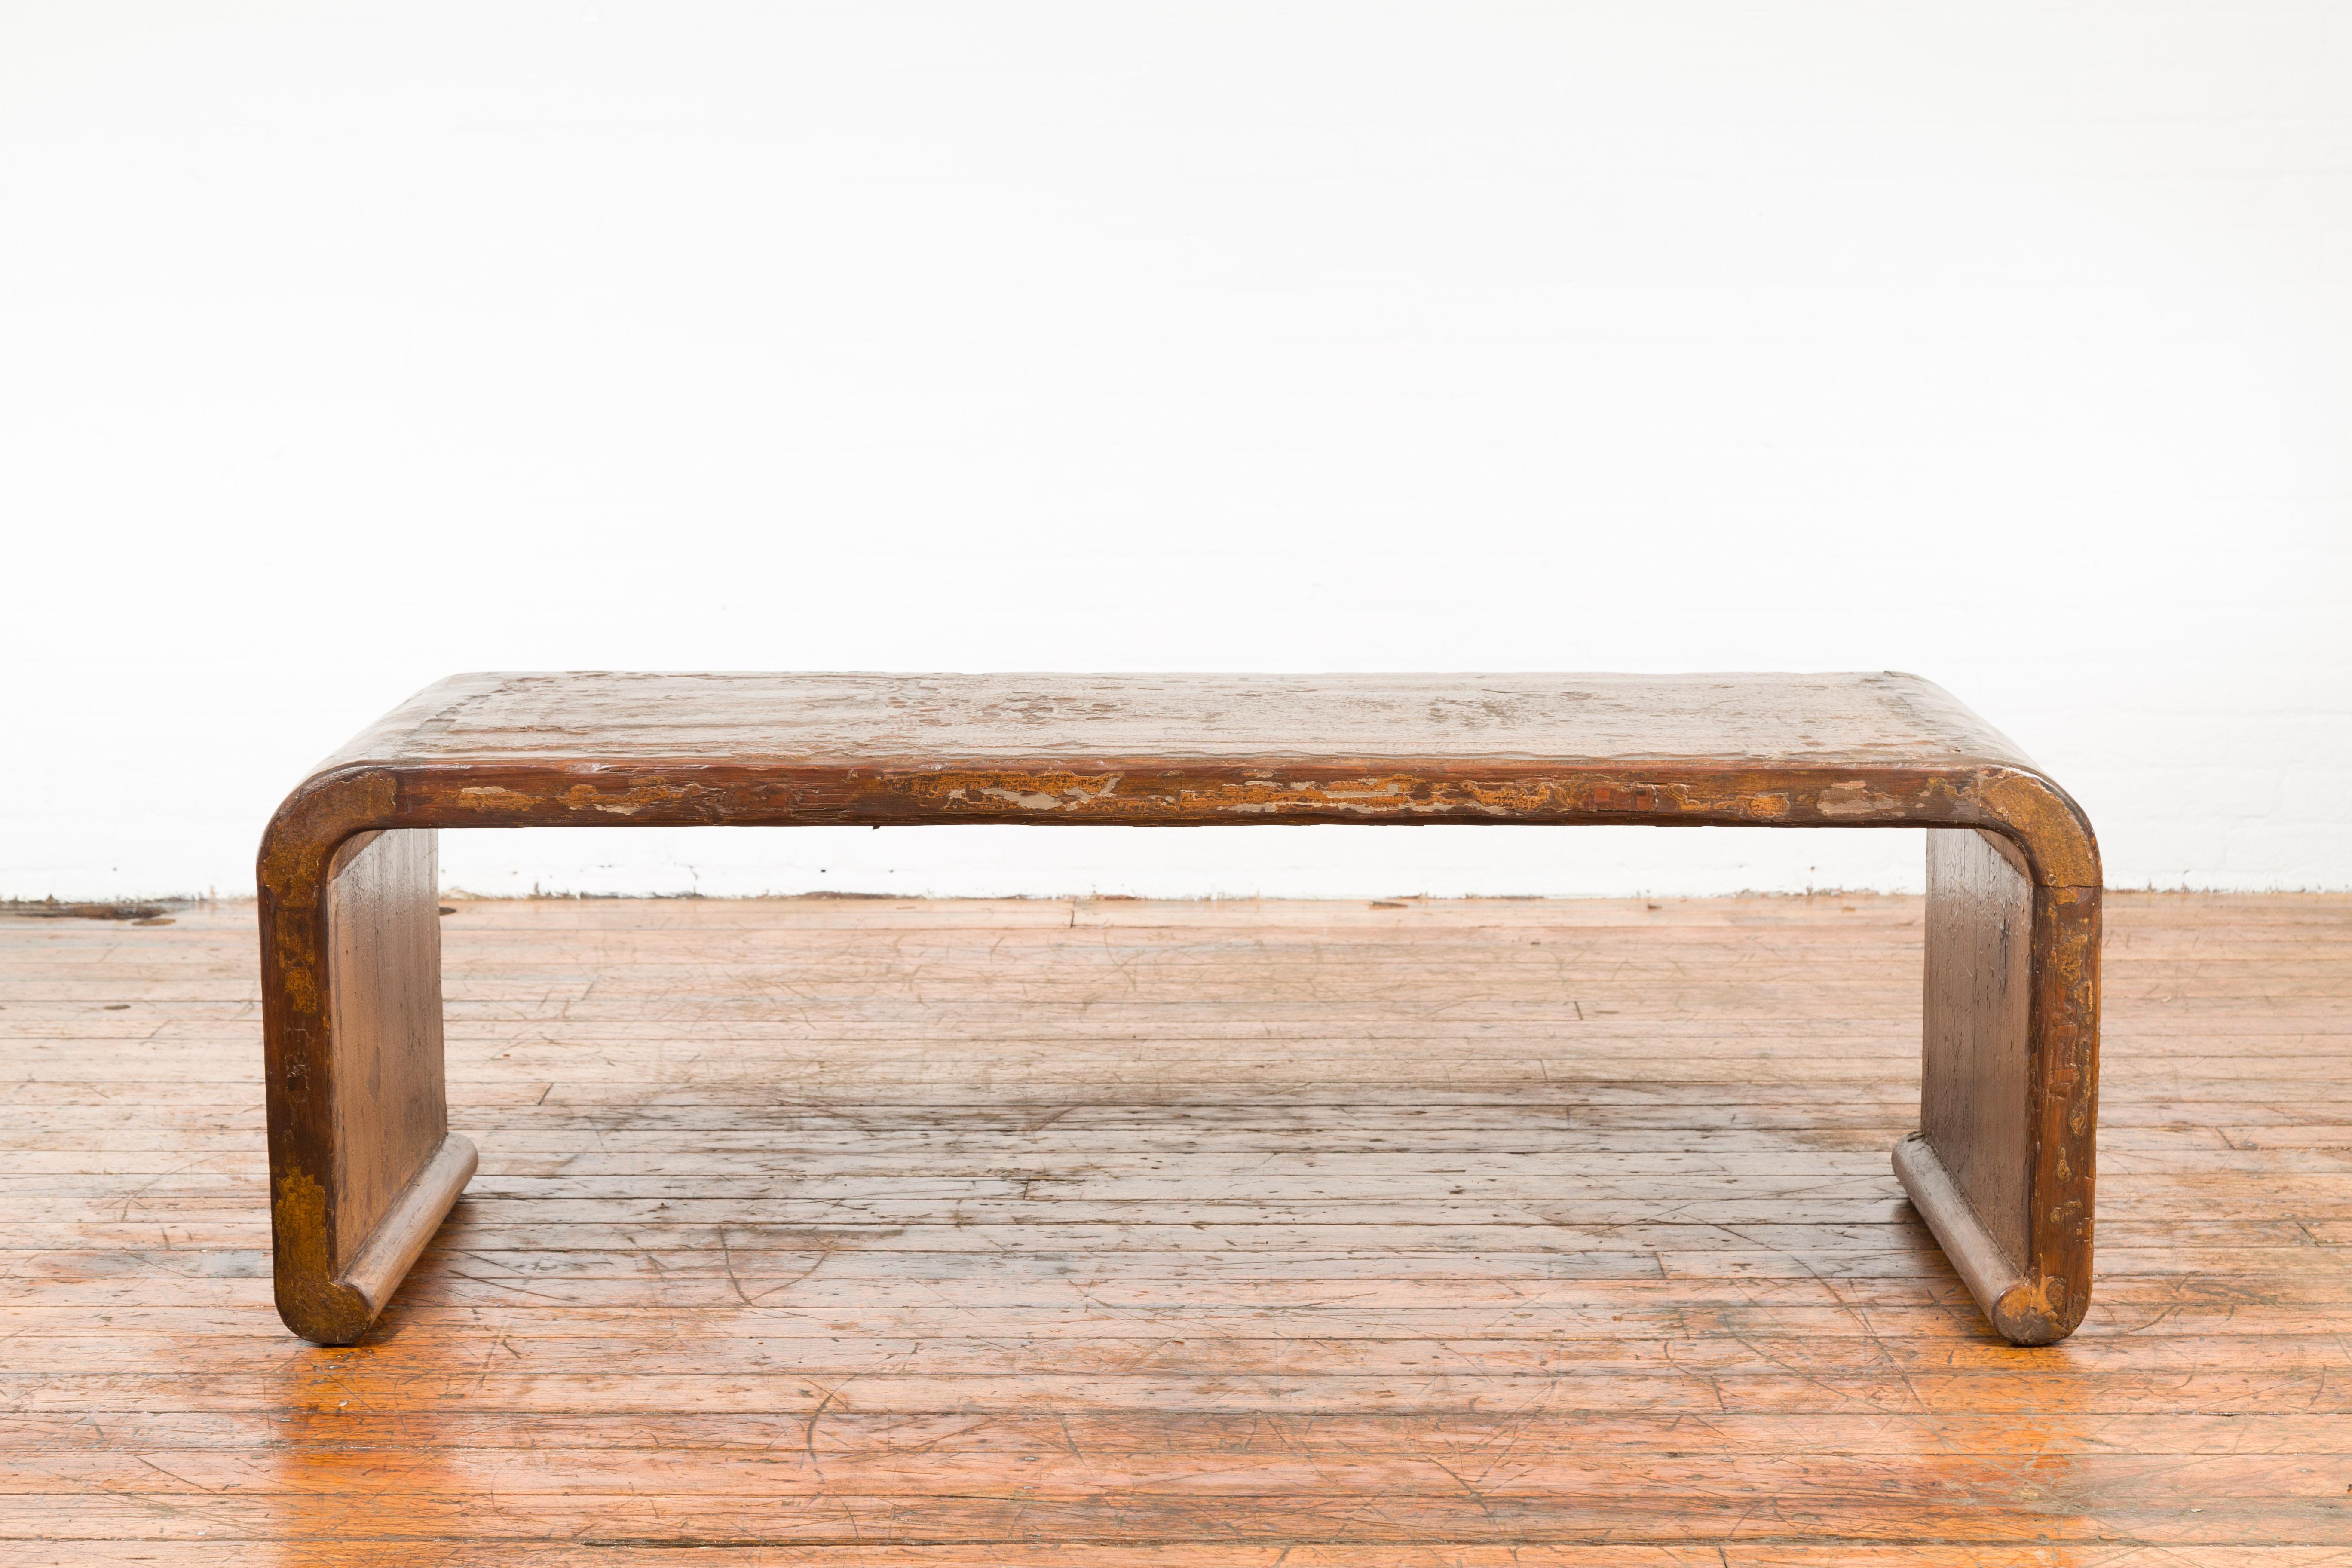 19th Century Chinese Qing Dynasty Distressed Waterfall Coffee Table with Scrolling Feet